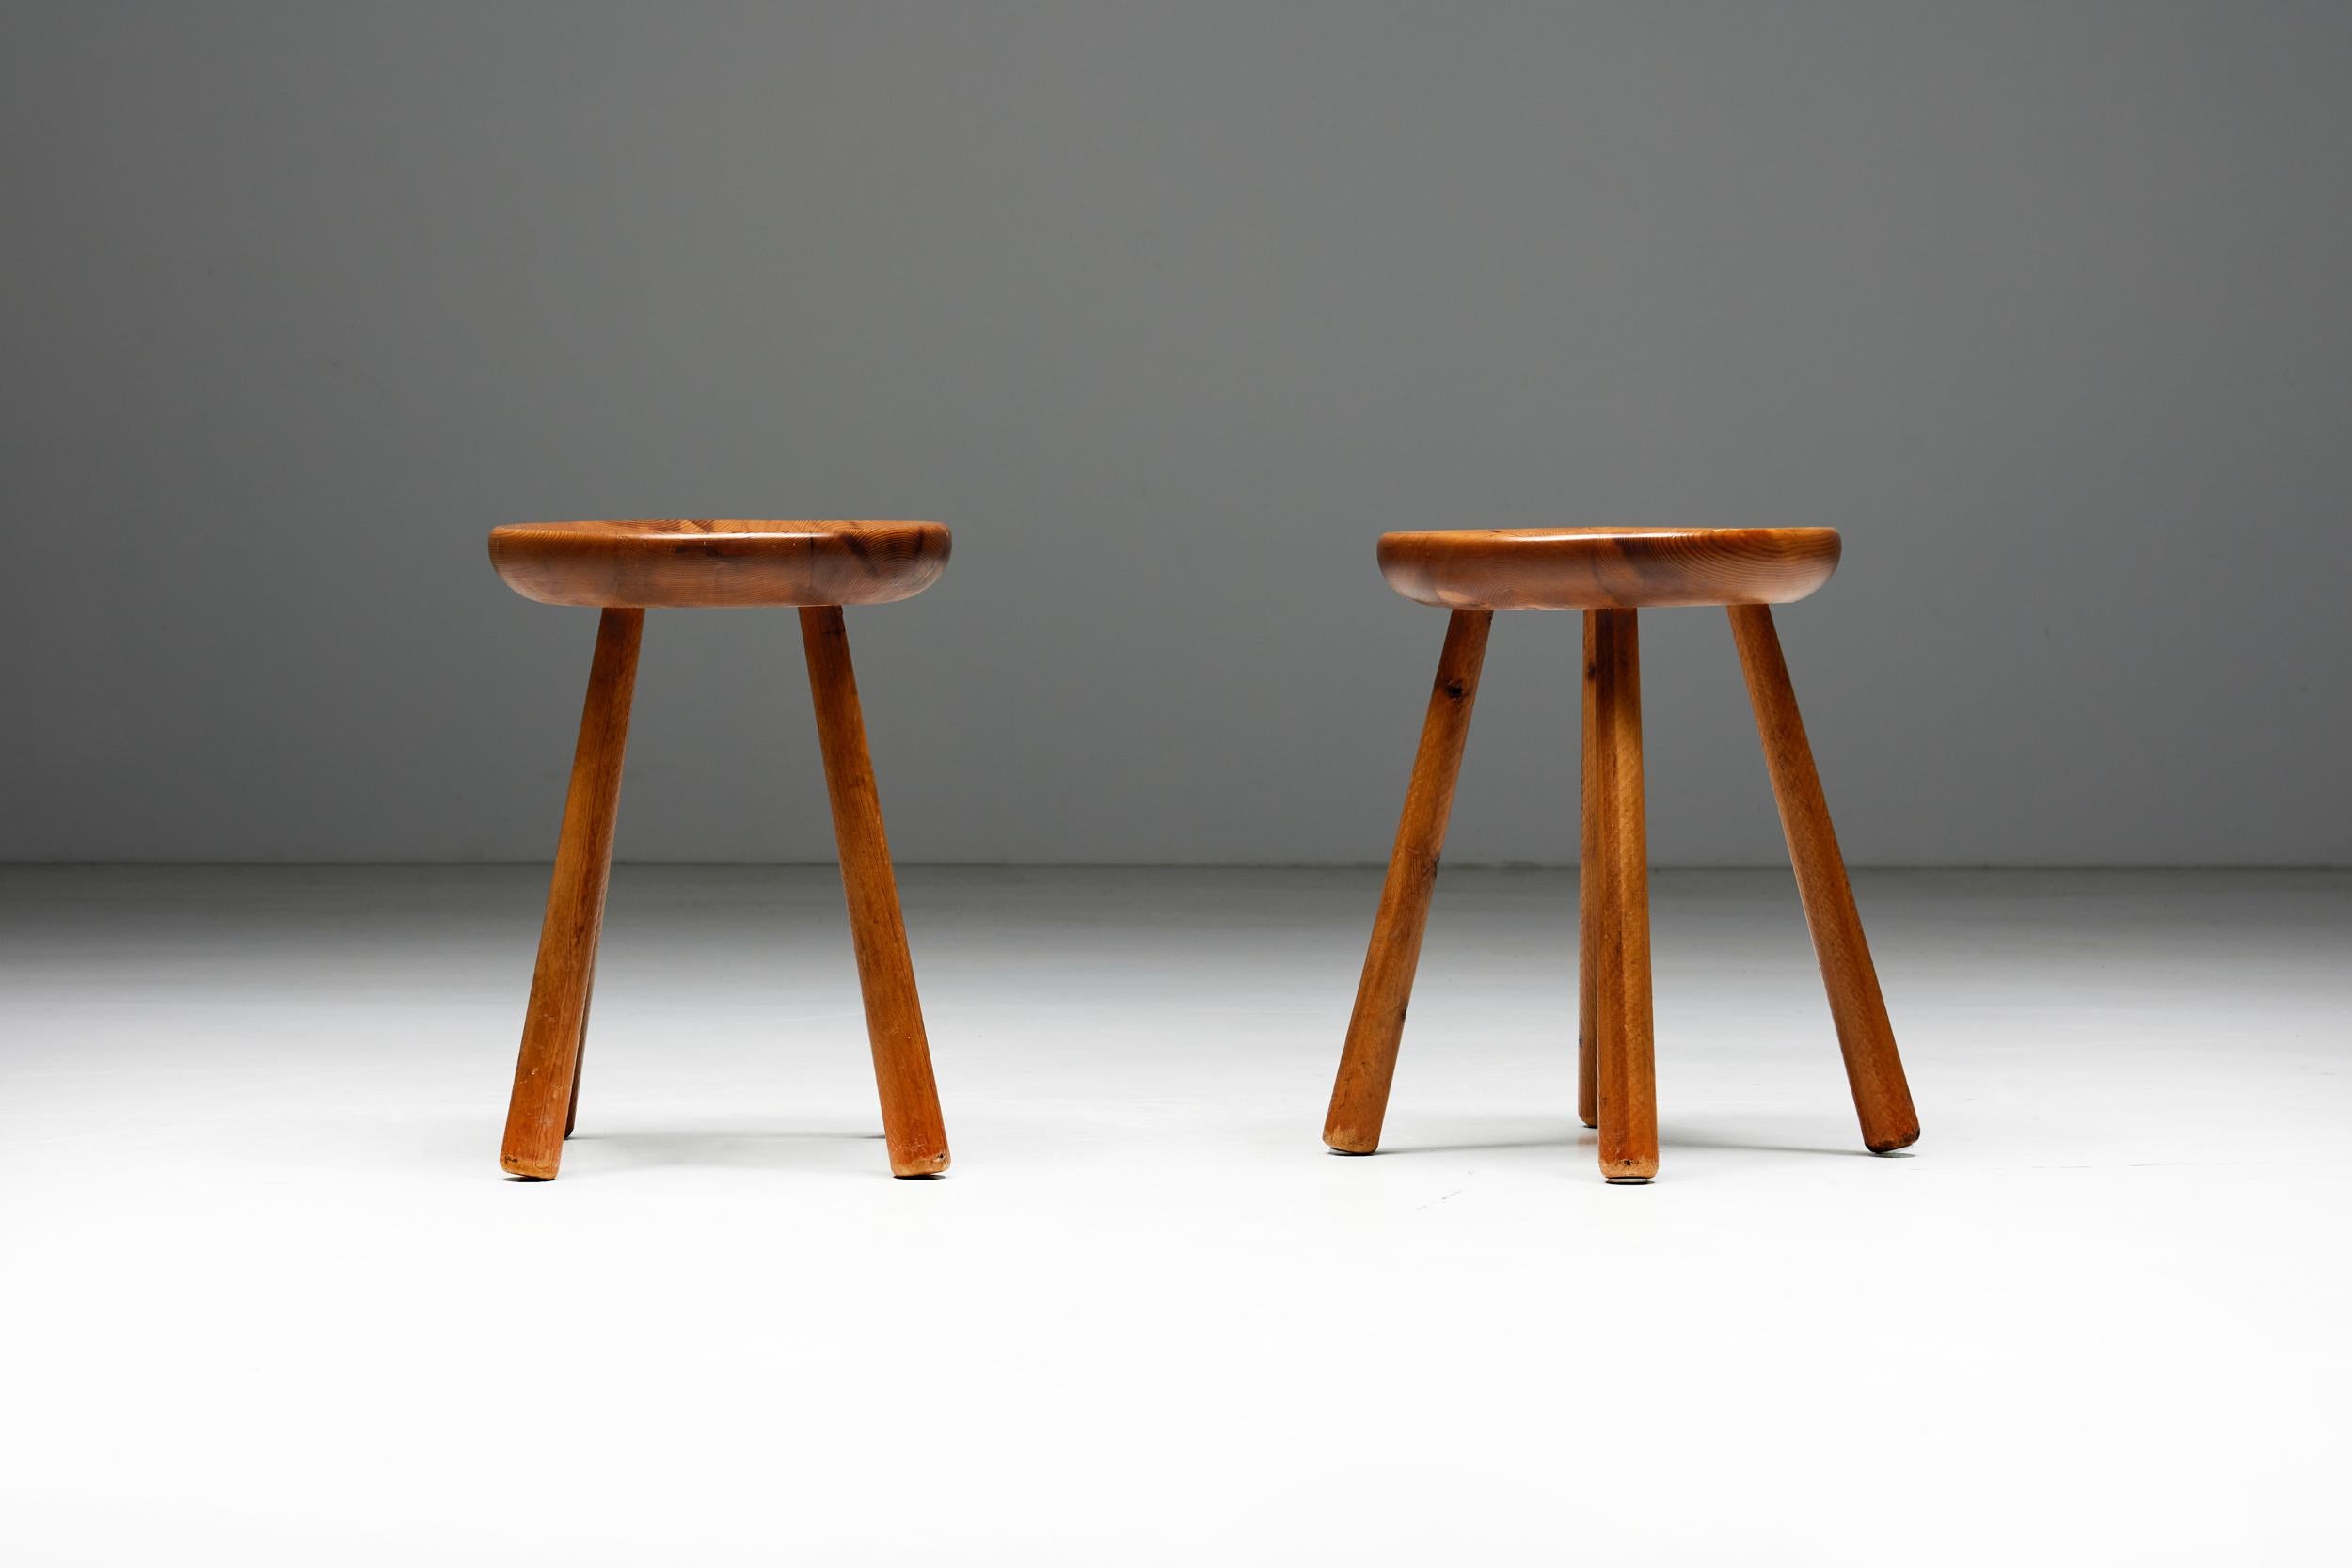 French minimalist pine stools, a timeless embodiment of mid-century elegance. Crafted circa 1950, these stools boast a distinctive design featuring four sleek legs and a subtly concave round seat, reminiscent of the iconic work of Charlotte